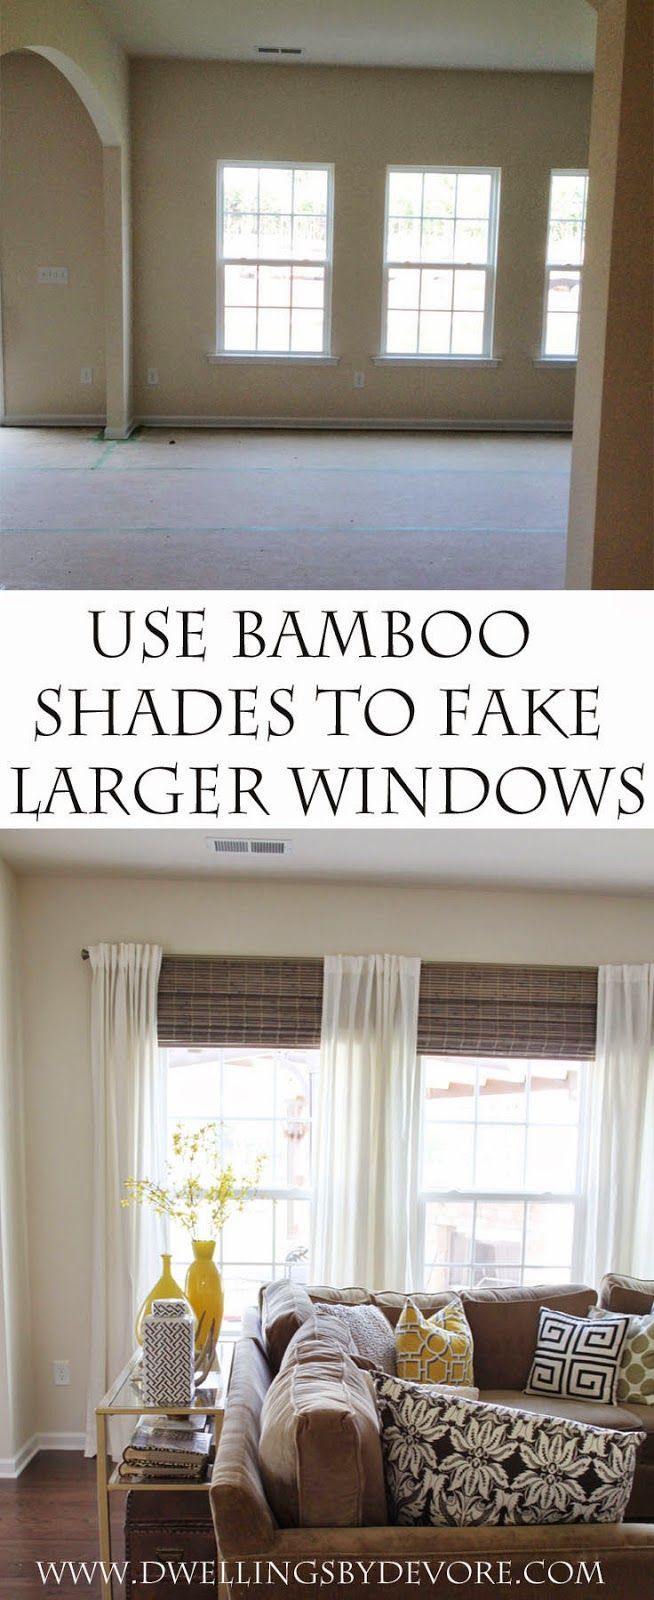 Dwellings By DeVore: Bamboo Shades to make your windows look larger